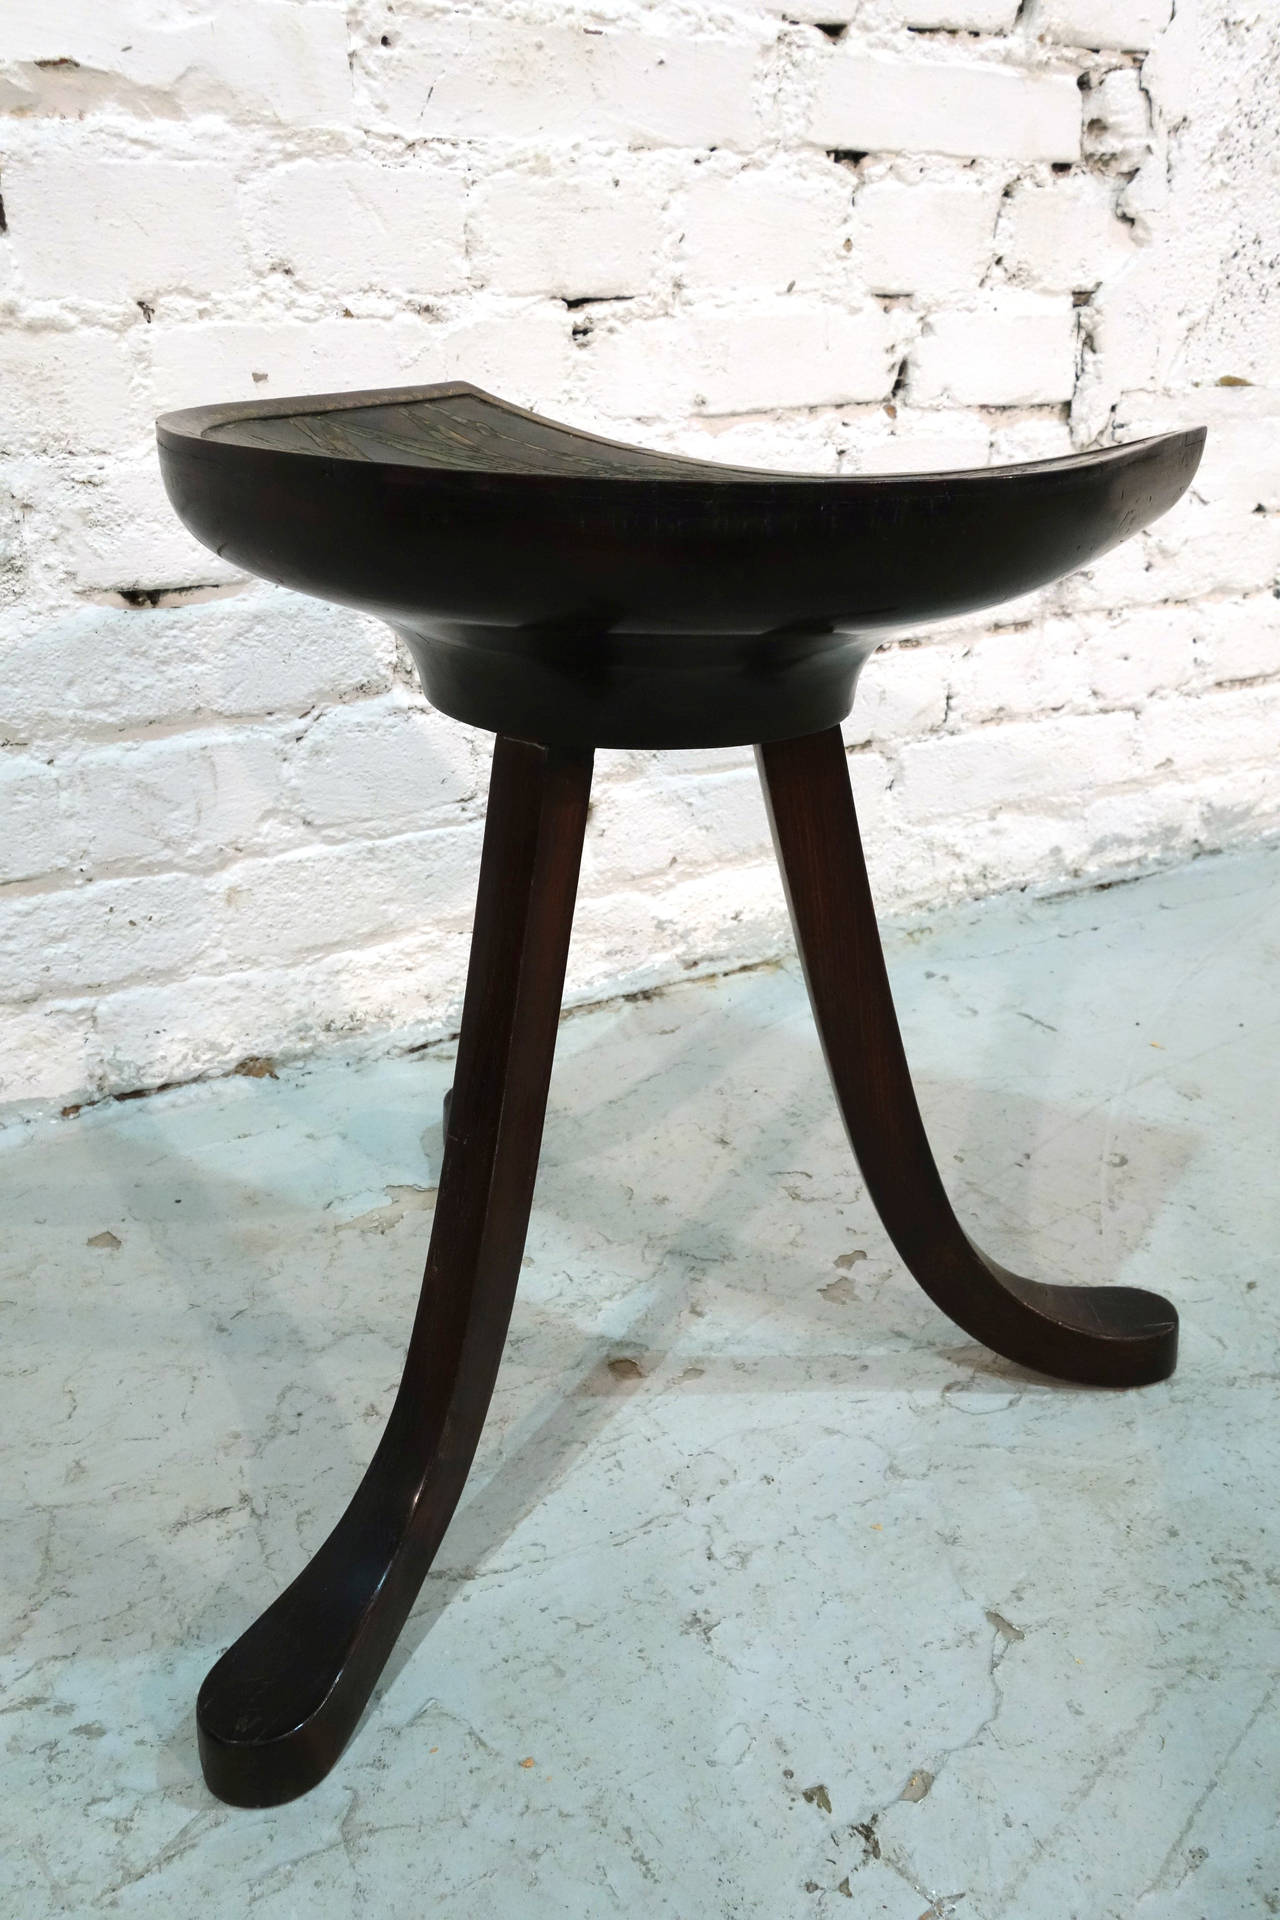 English Thebes Stool Attributed to Leonard F. Wyburd for Liberty & Co